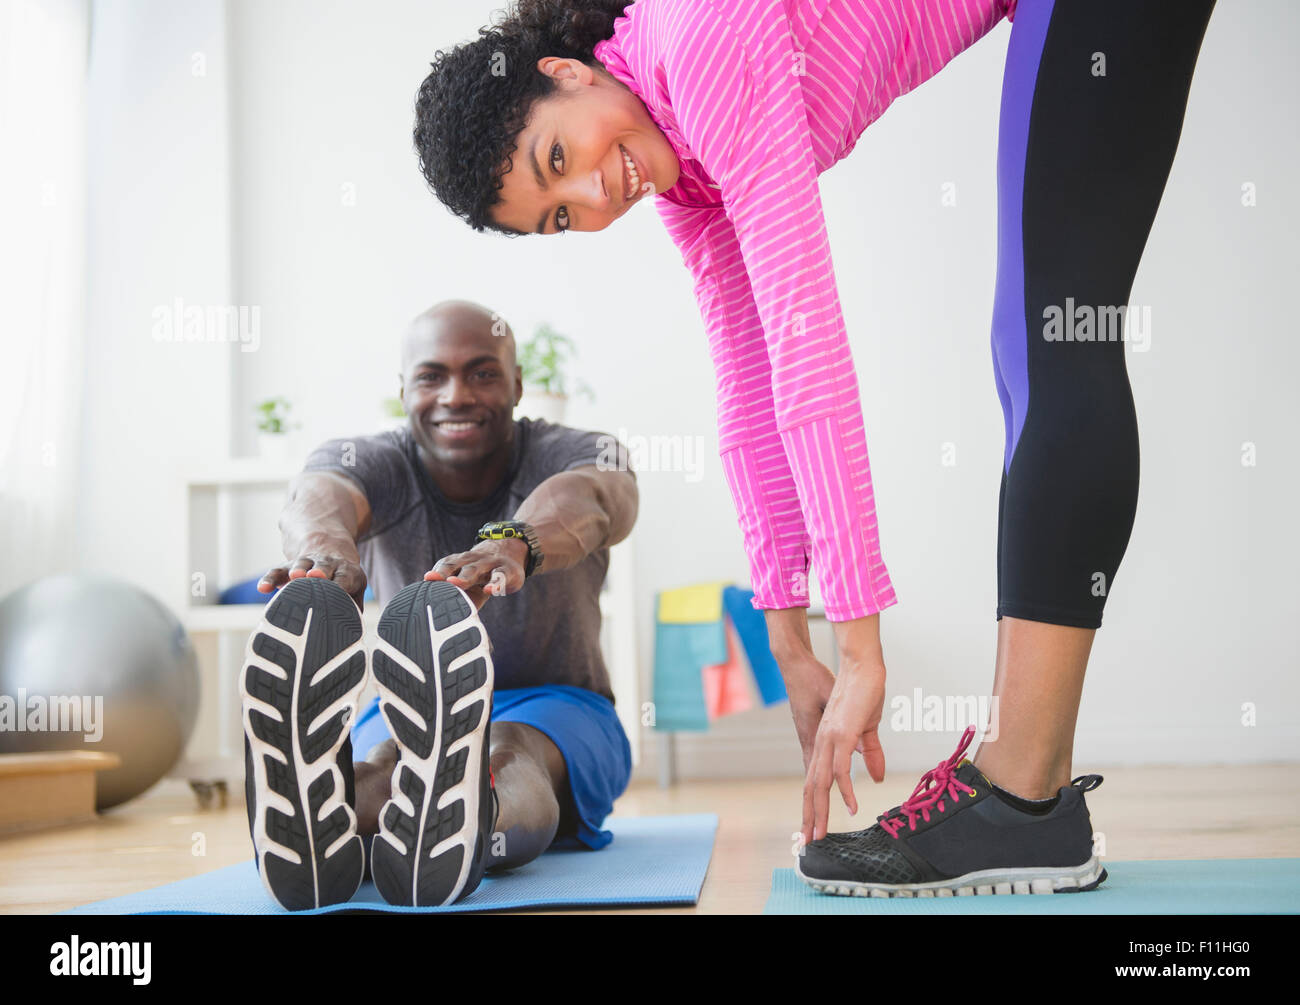 Couple stretching in gym Banque D'Images